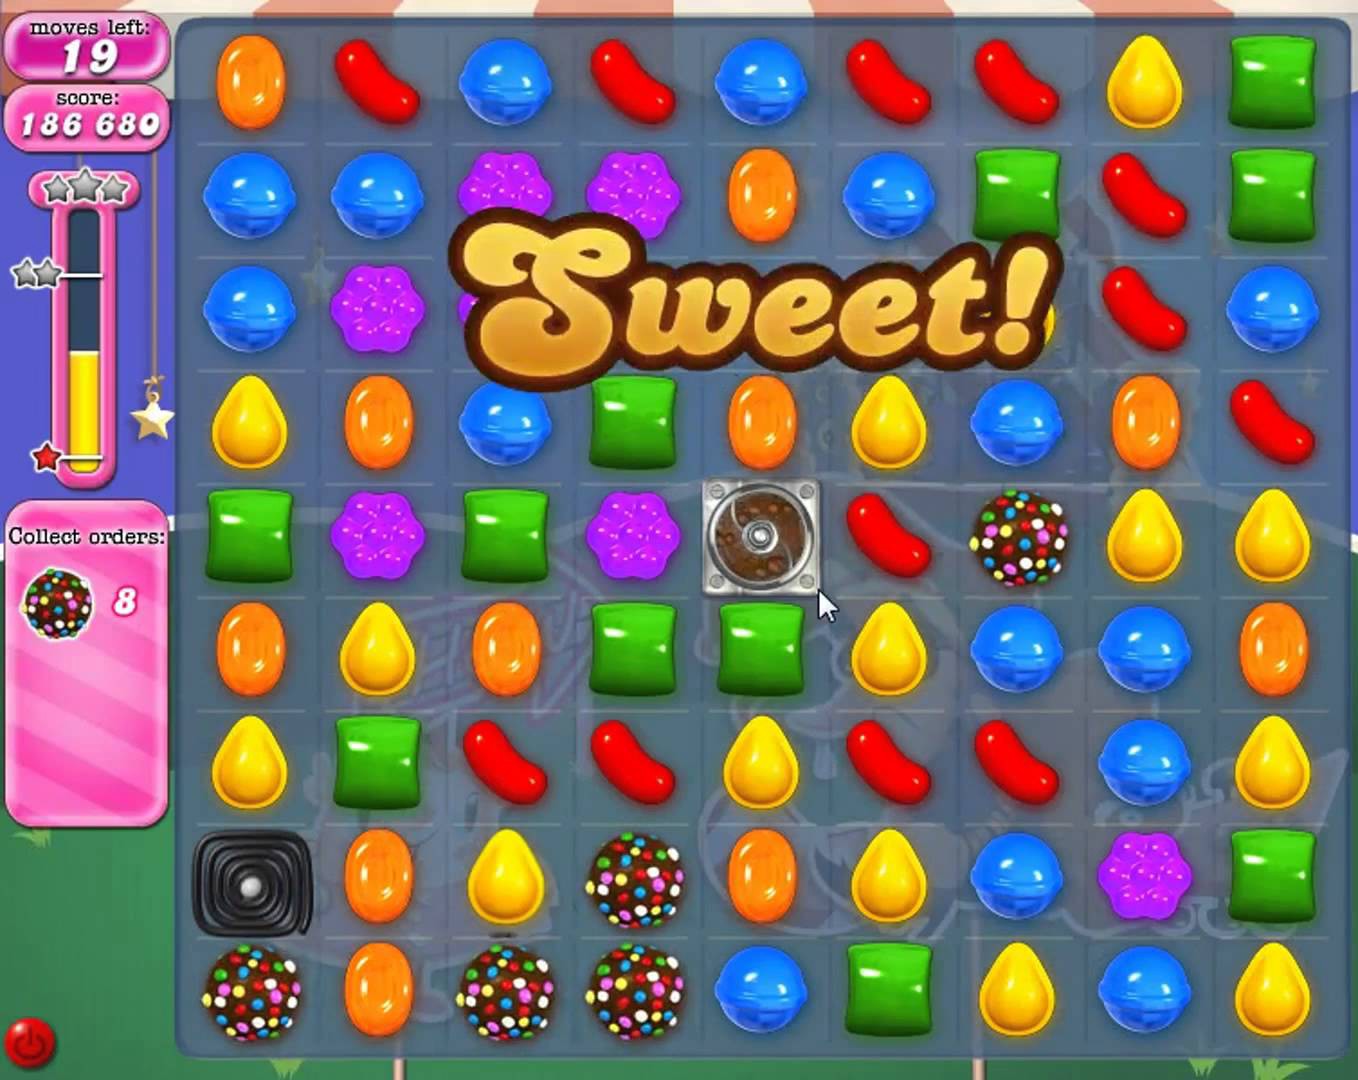 Lives in Candy Crush